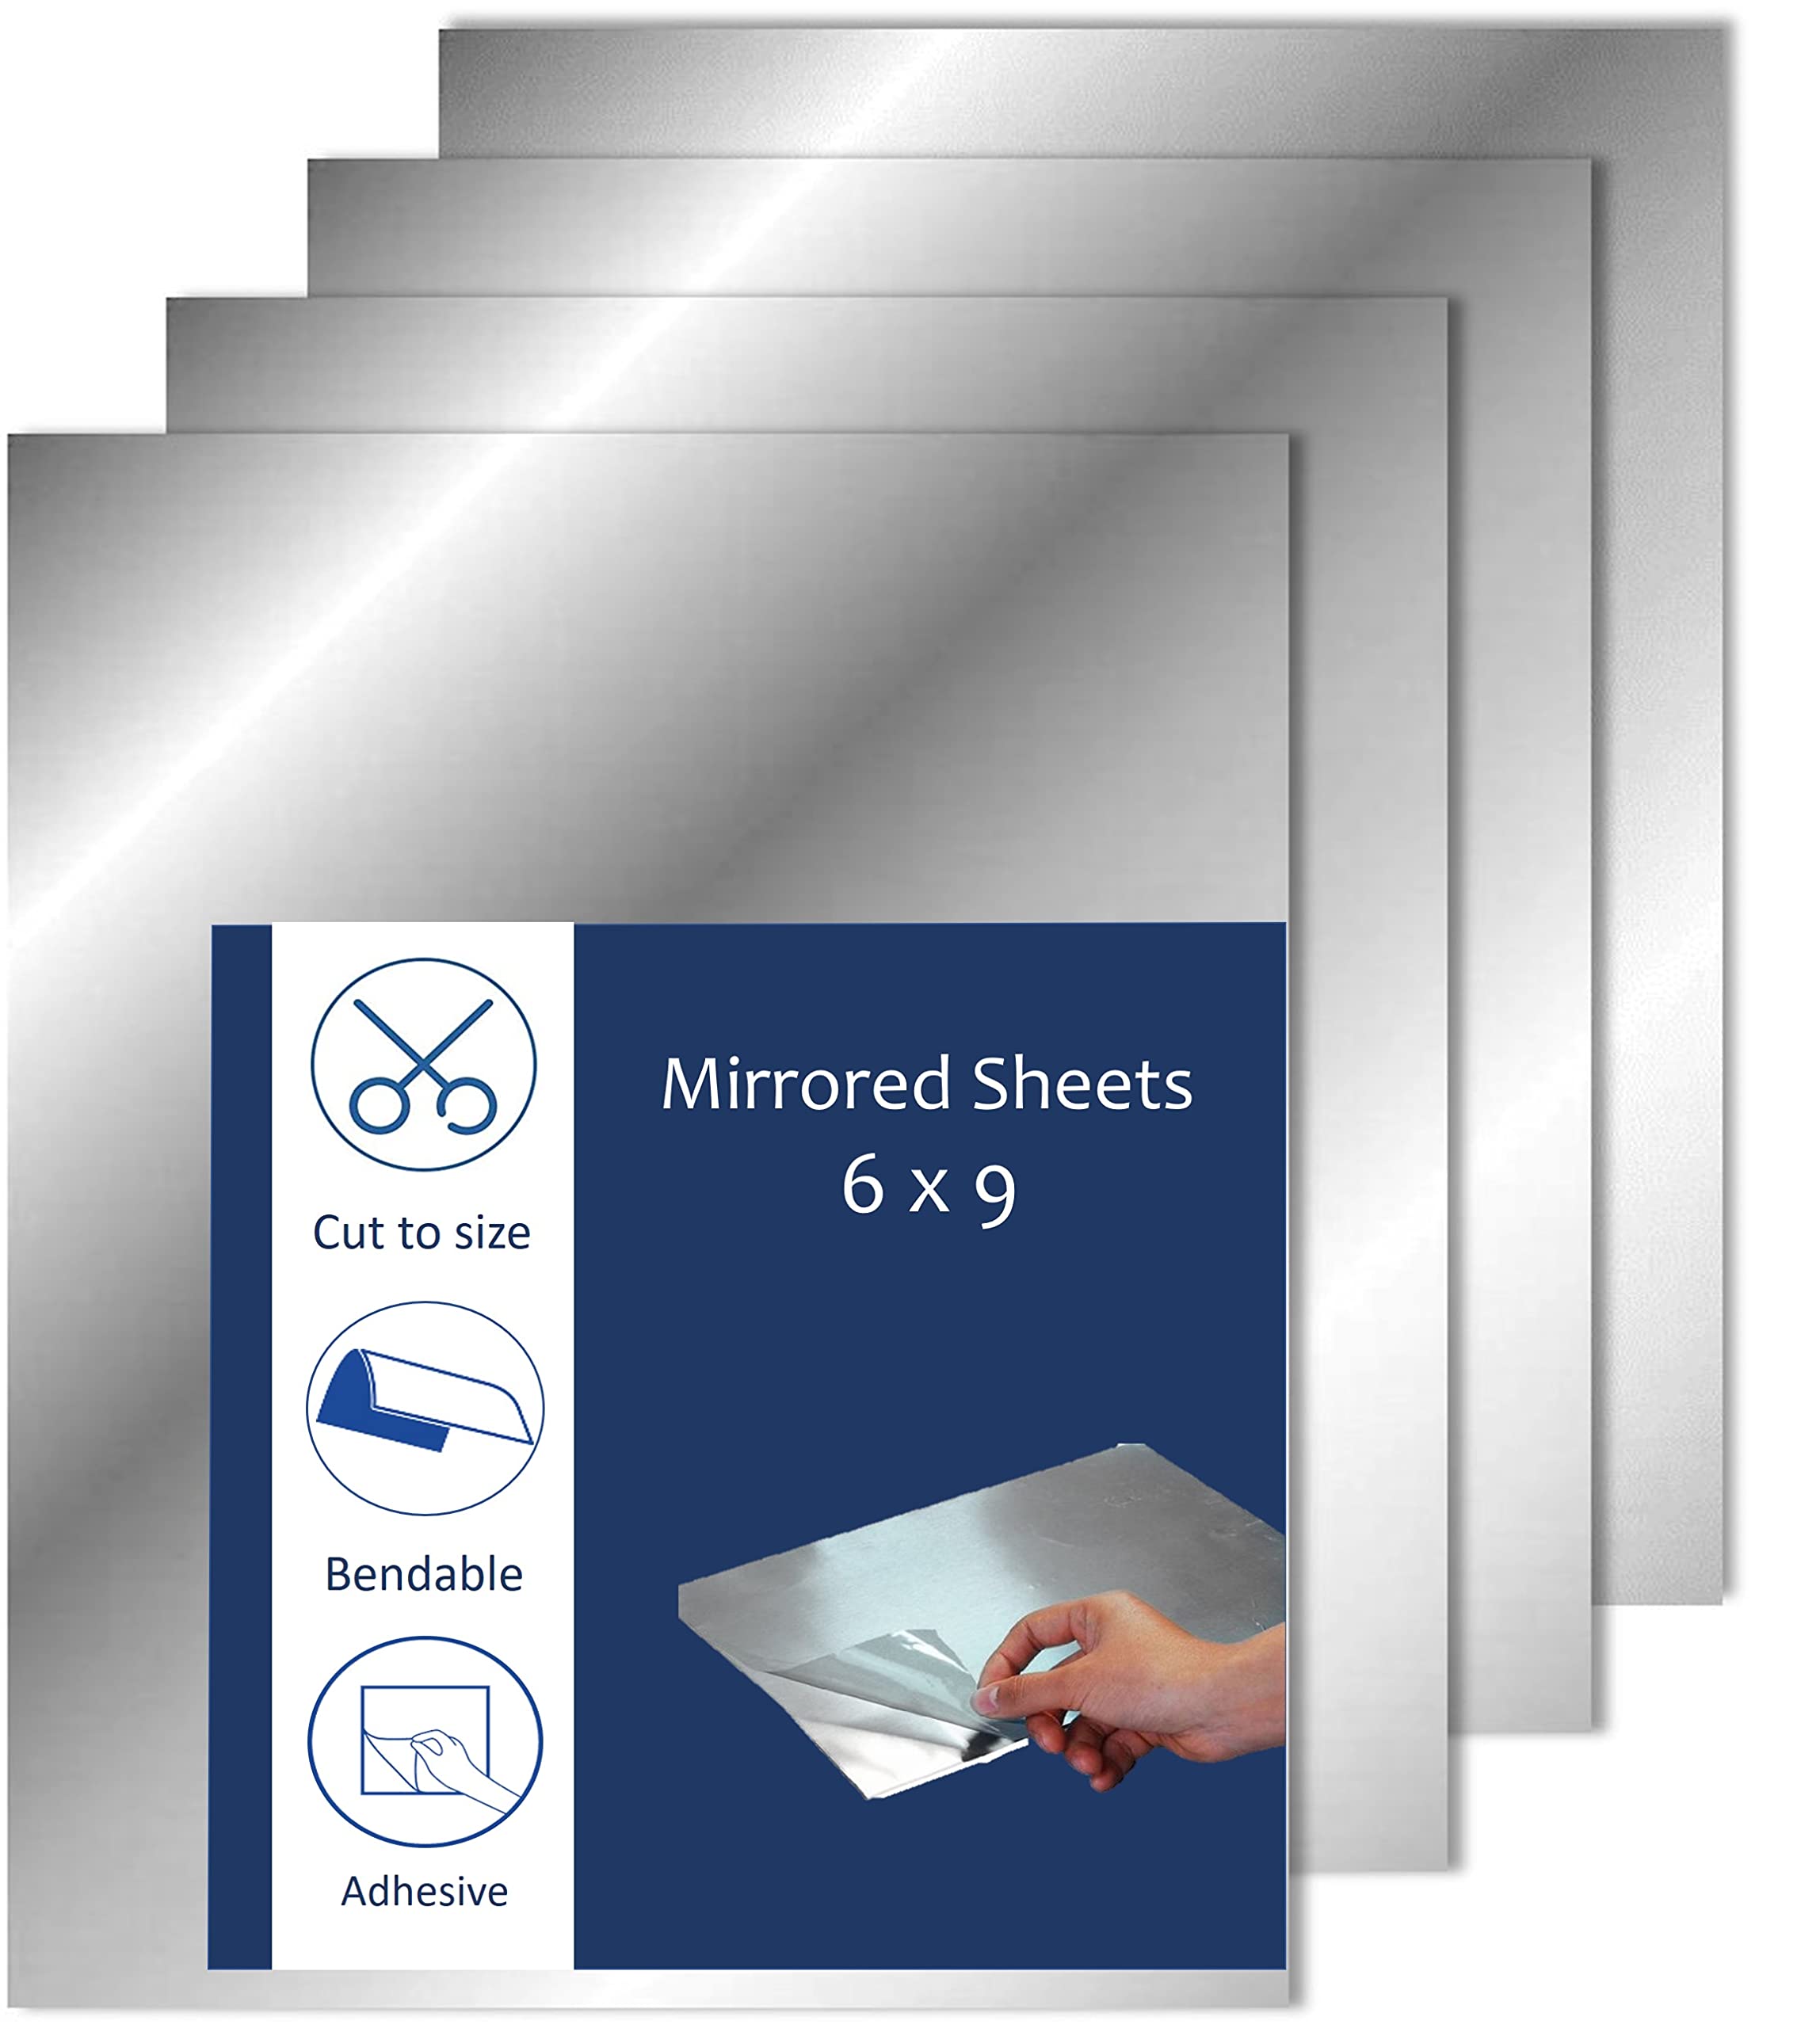 Quality Adhesive Mirror Sheet 6 x 9 Inches Flexible Mirrors Sheets, Non-Glass Self Adhesive Stick on Mirror Tiles, Cut Mirror Stickers to Size, Peel and Stick, Great for Crafts and Mirror Wall,  - Very Good